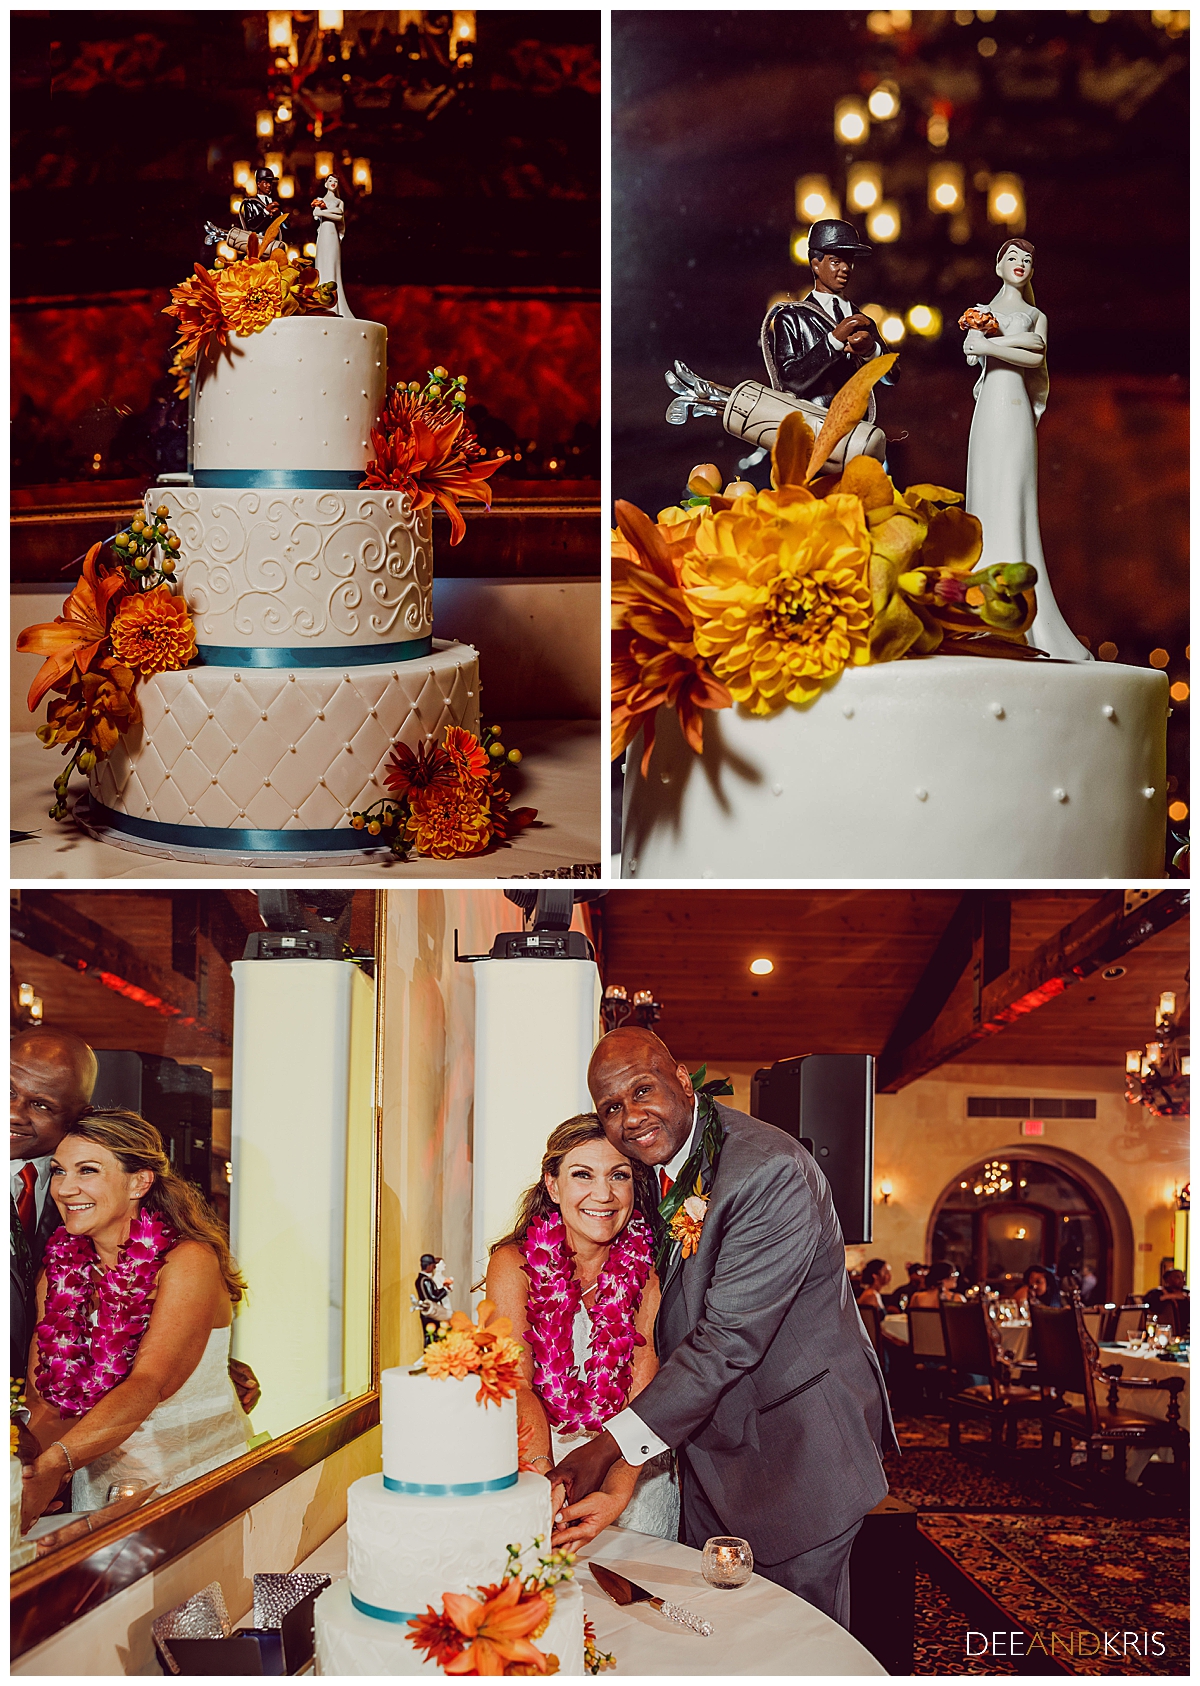 Three images: Top left image of full three tier cake. Top right image of cake topper of bride with arms crossed ad groom with golf bag. Bottom image of couple cutting cake.